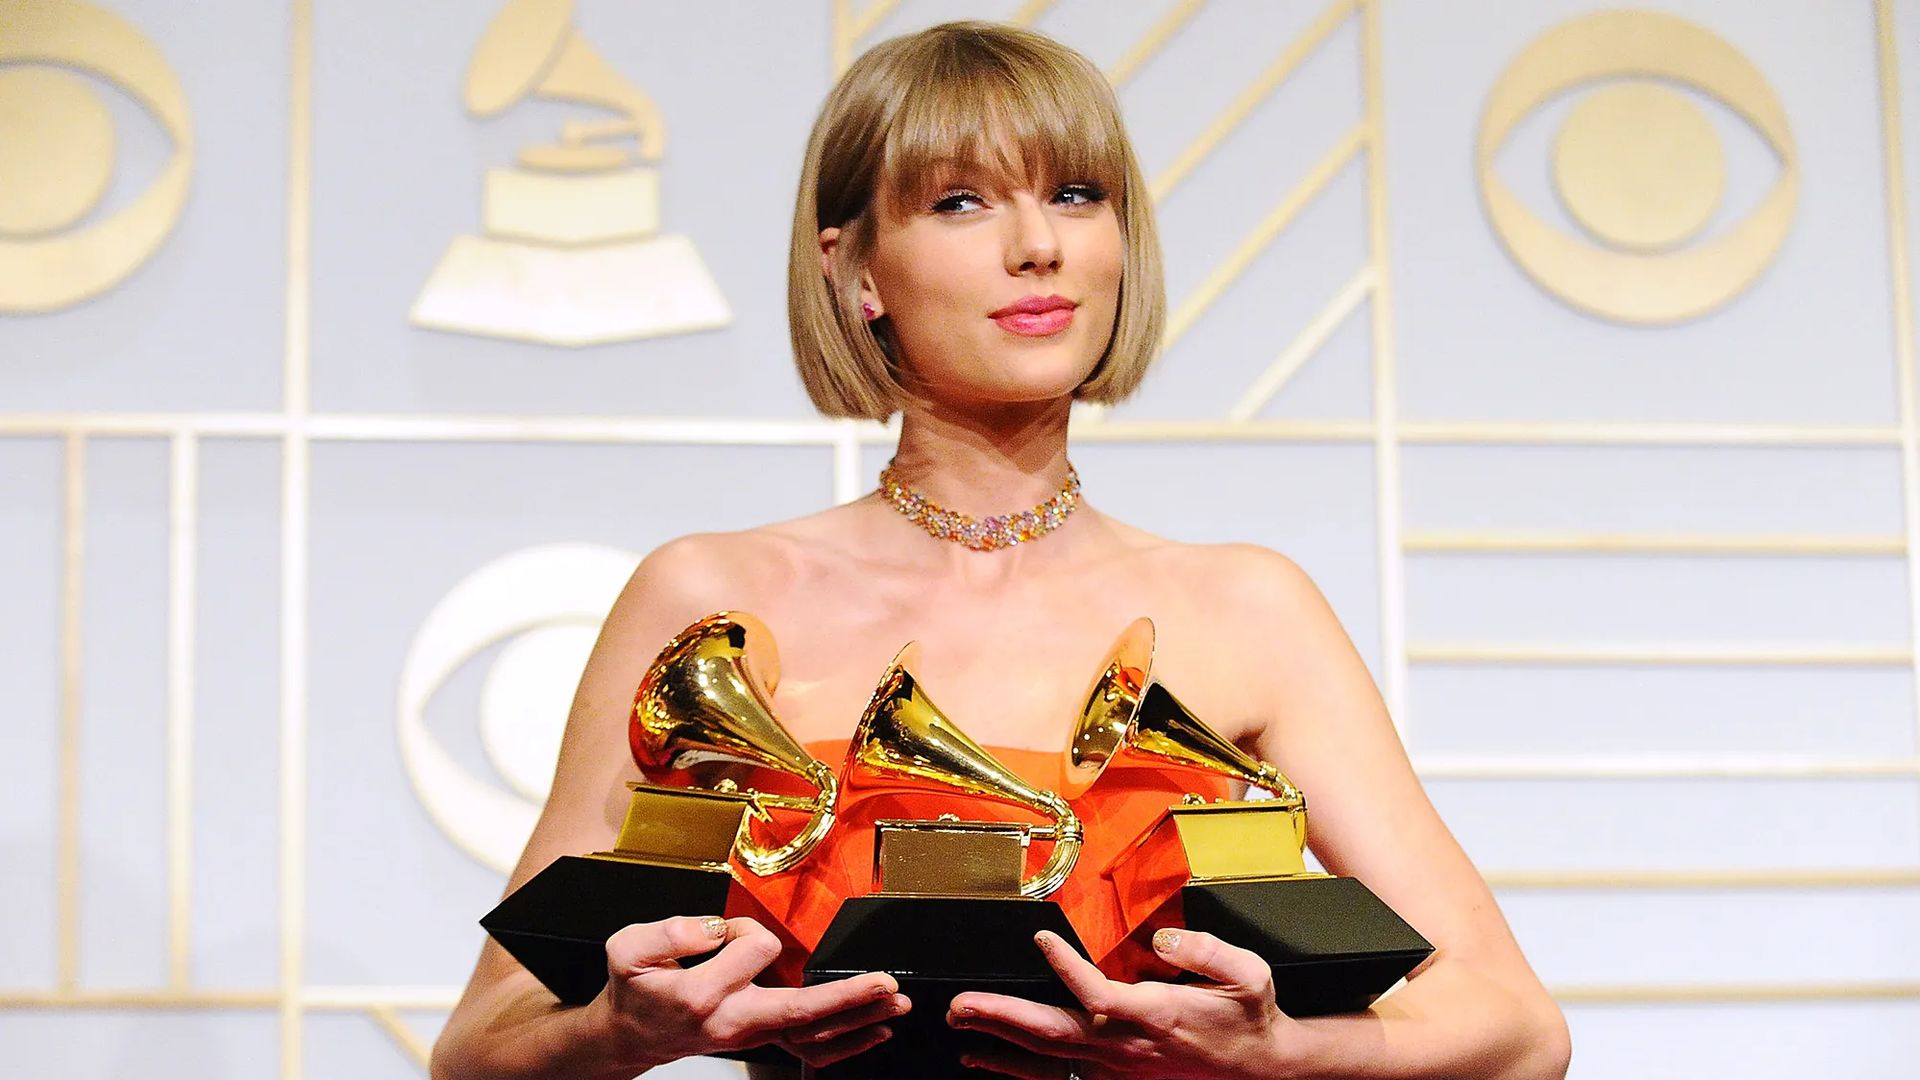 Thousands of Taylor Swift’s awards